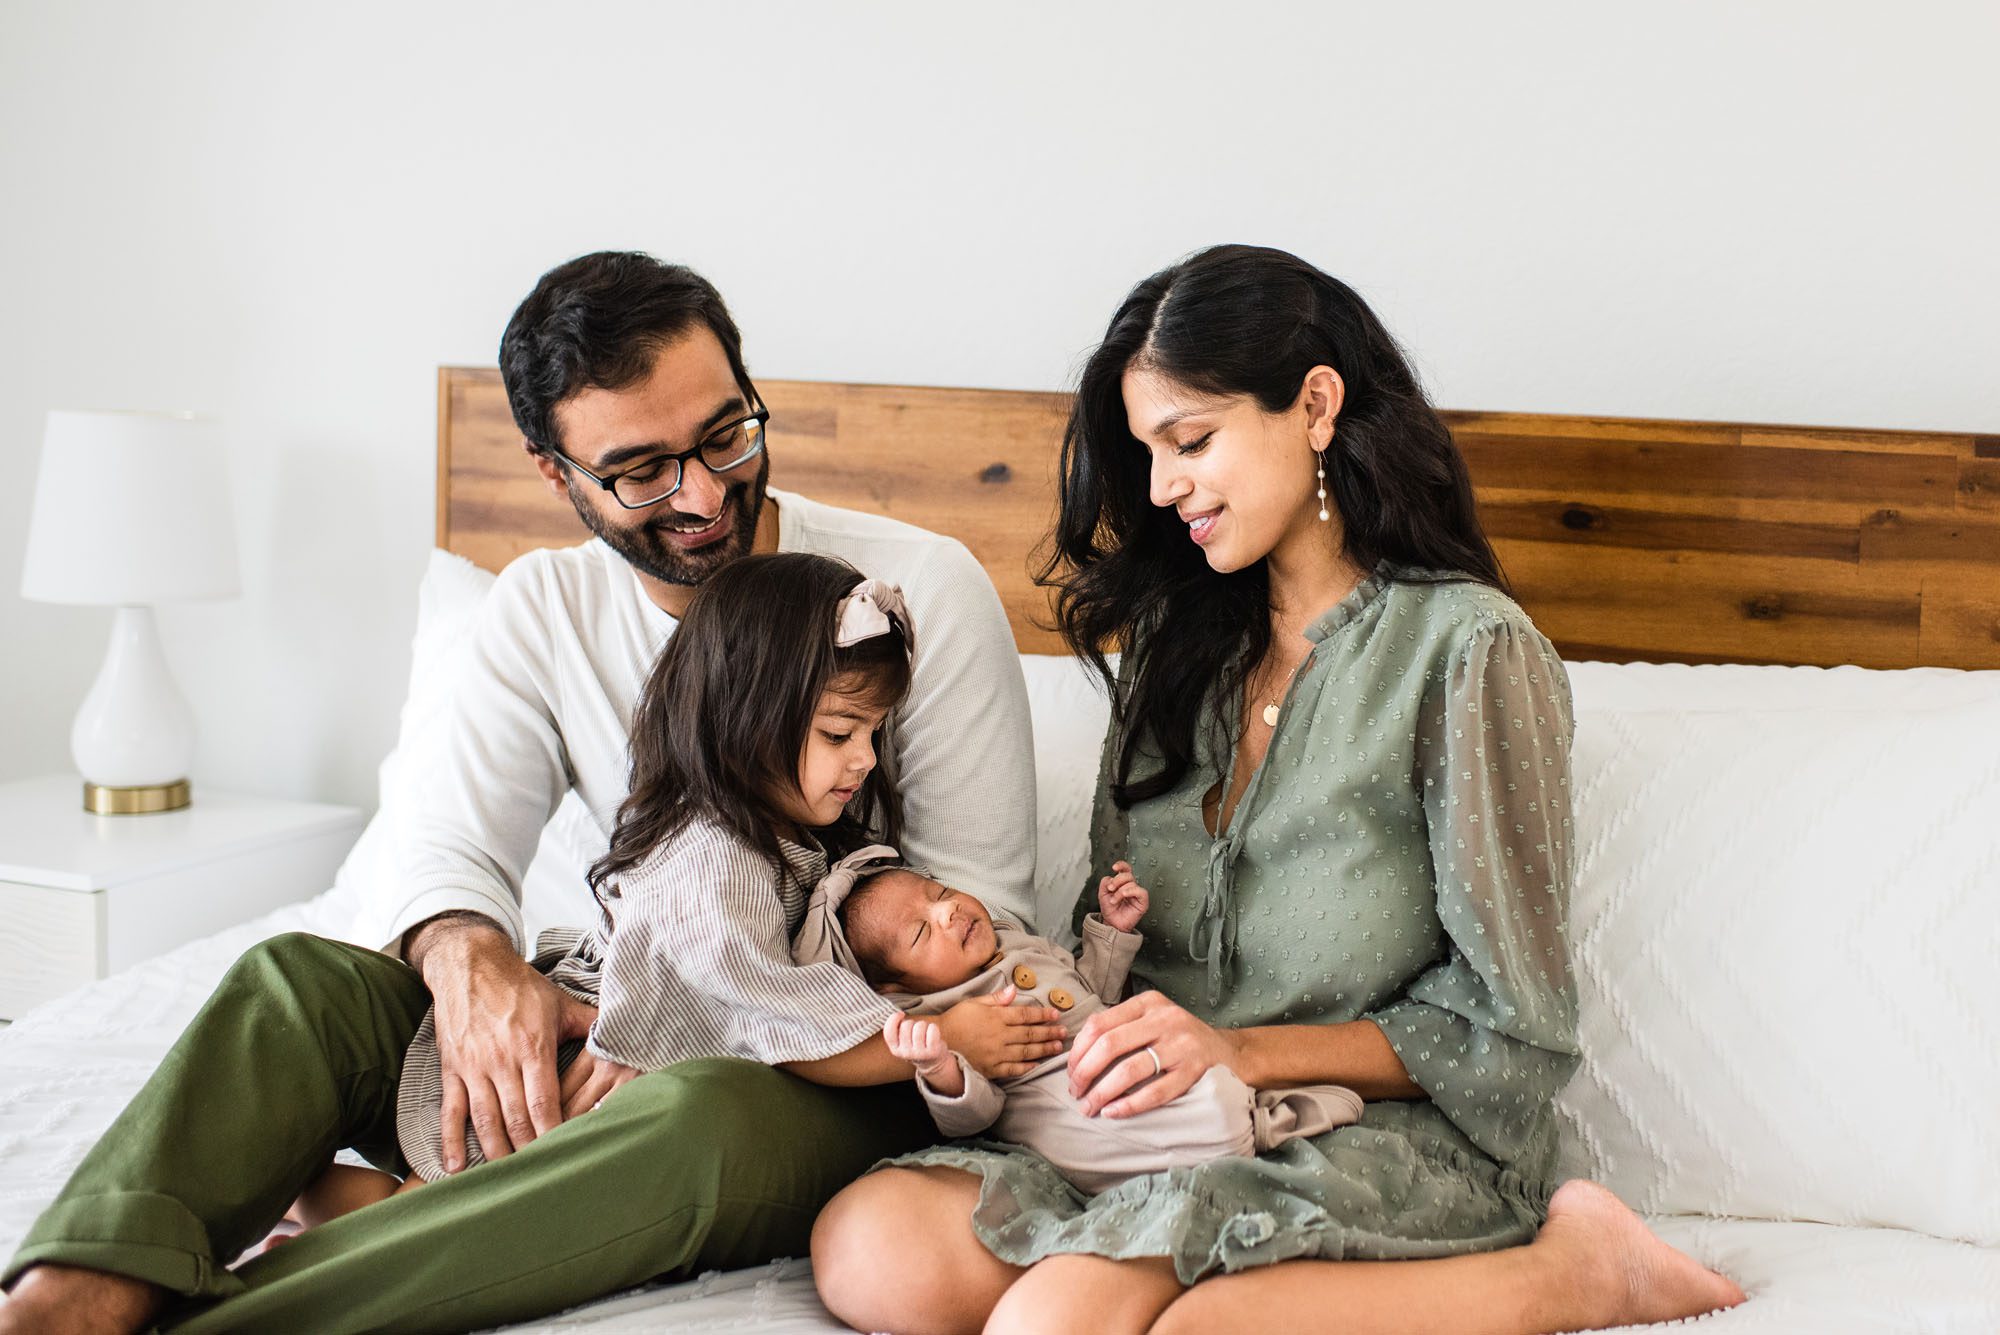 Family sitting together on bed with newborn baby, San Antonio lifestyle photographer